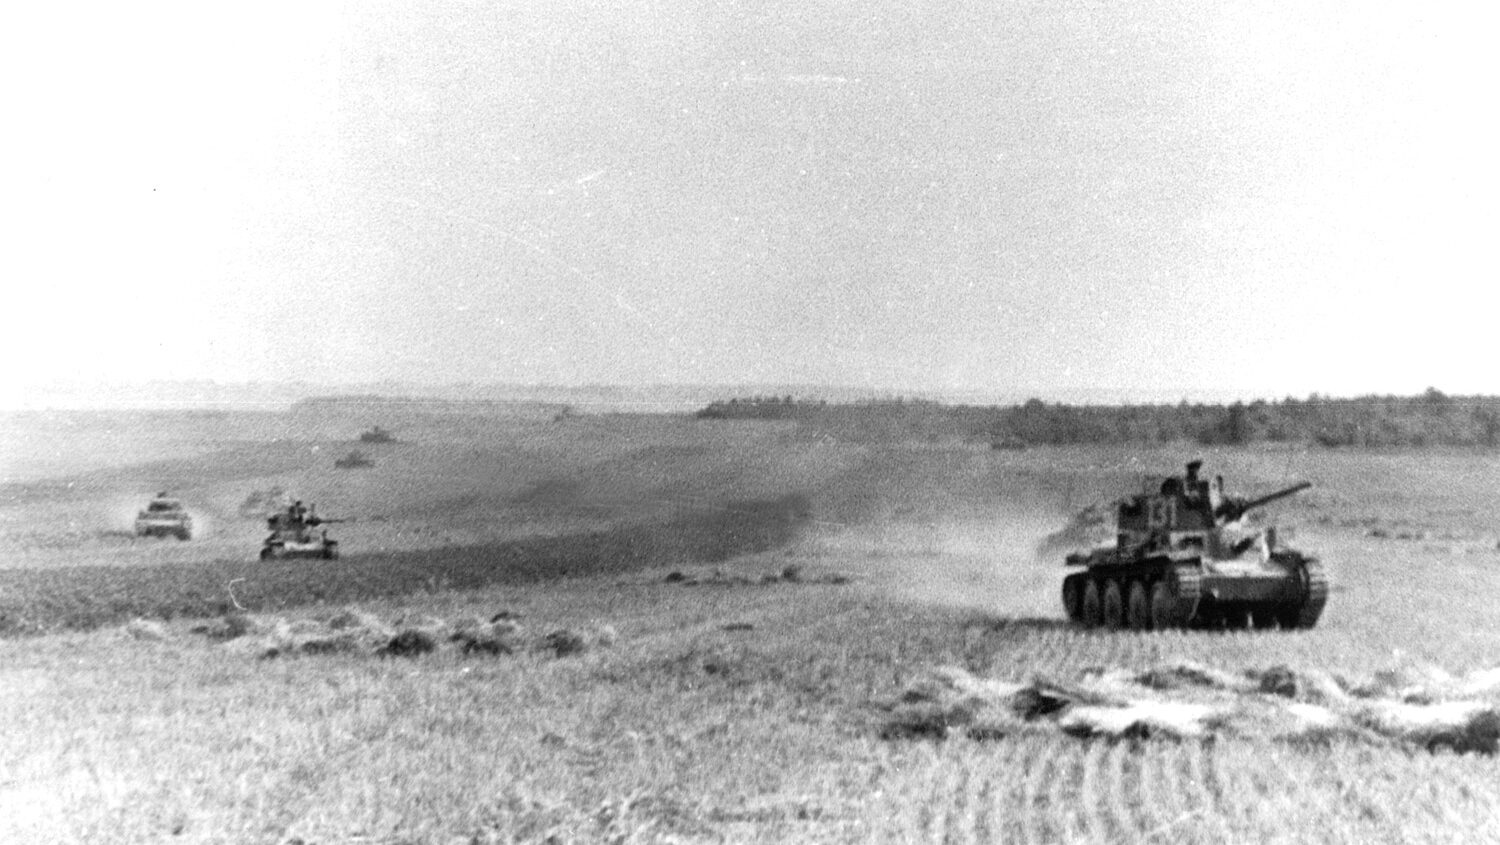 Following the renewal of major operations in the West on May 10, 1940, Czech-designed tanks of the German Army roll rapidly across France and toward the English Channel. Using Czech technology enabled the panzer arm of the Wehrmacht to deliver firepower and mobility to the front in the early days of the war. 